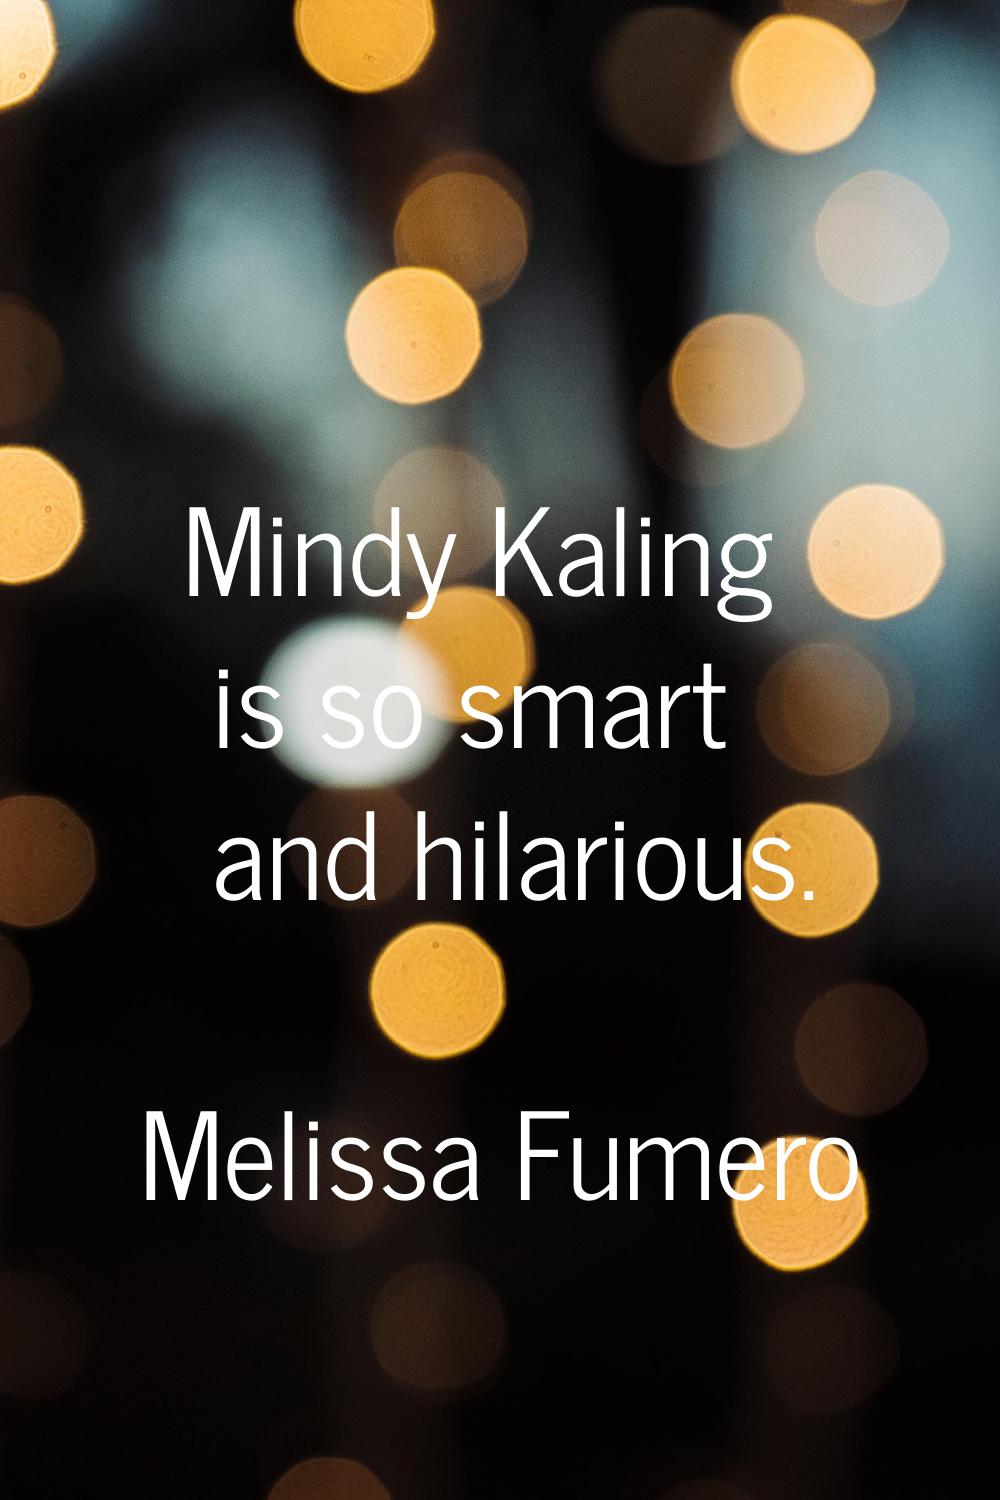 Mindy Kaling is so smart and hilarious.